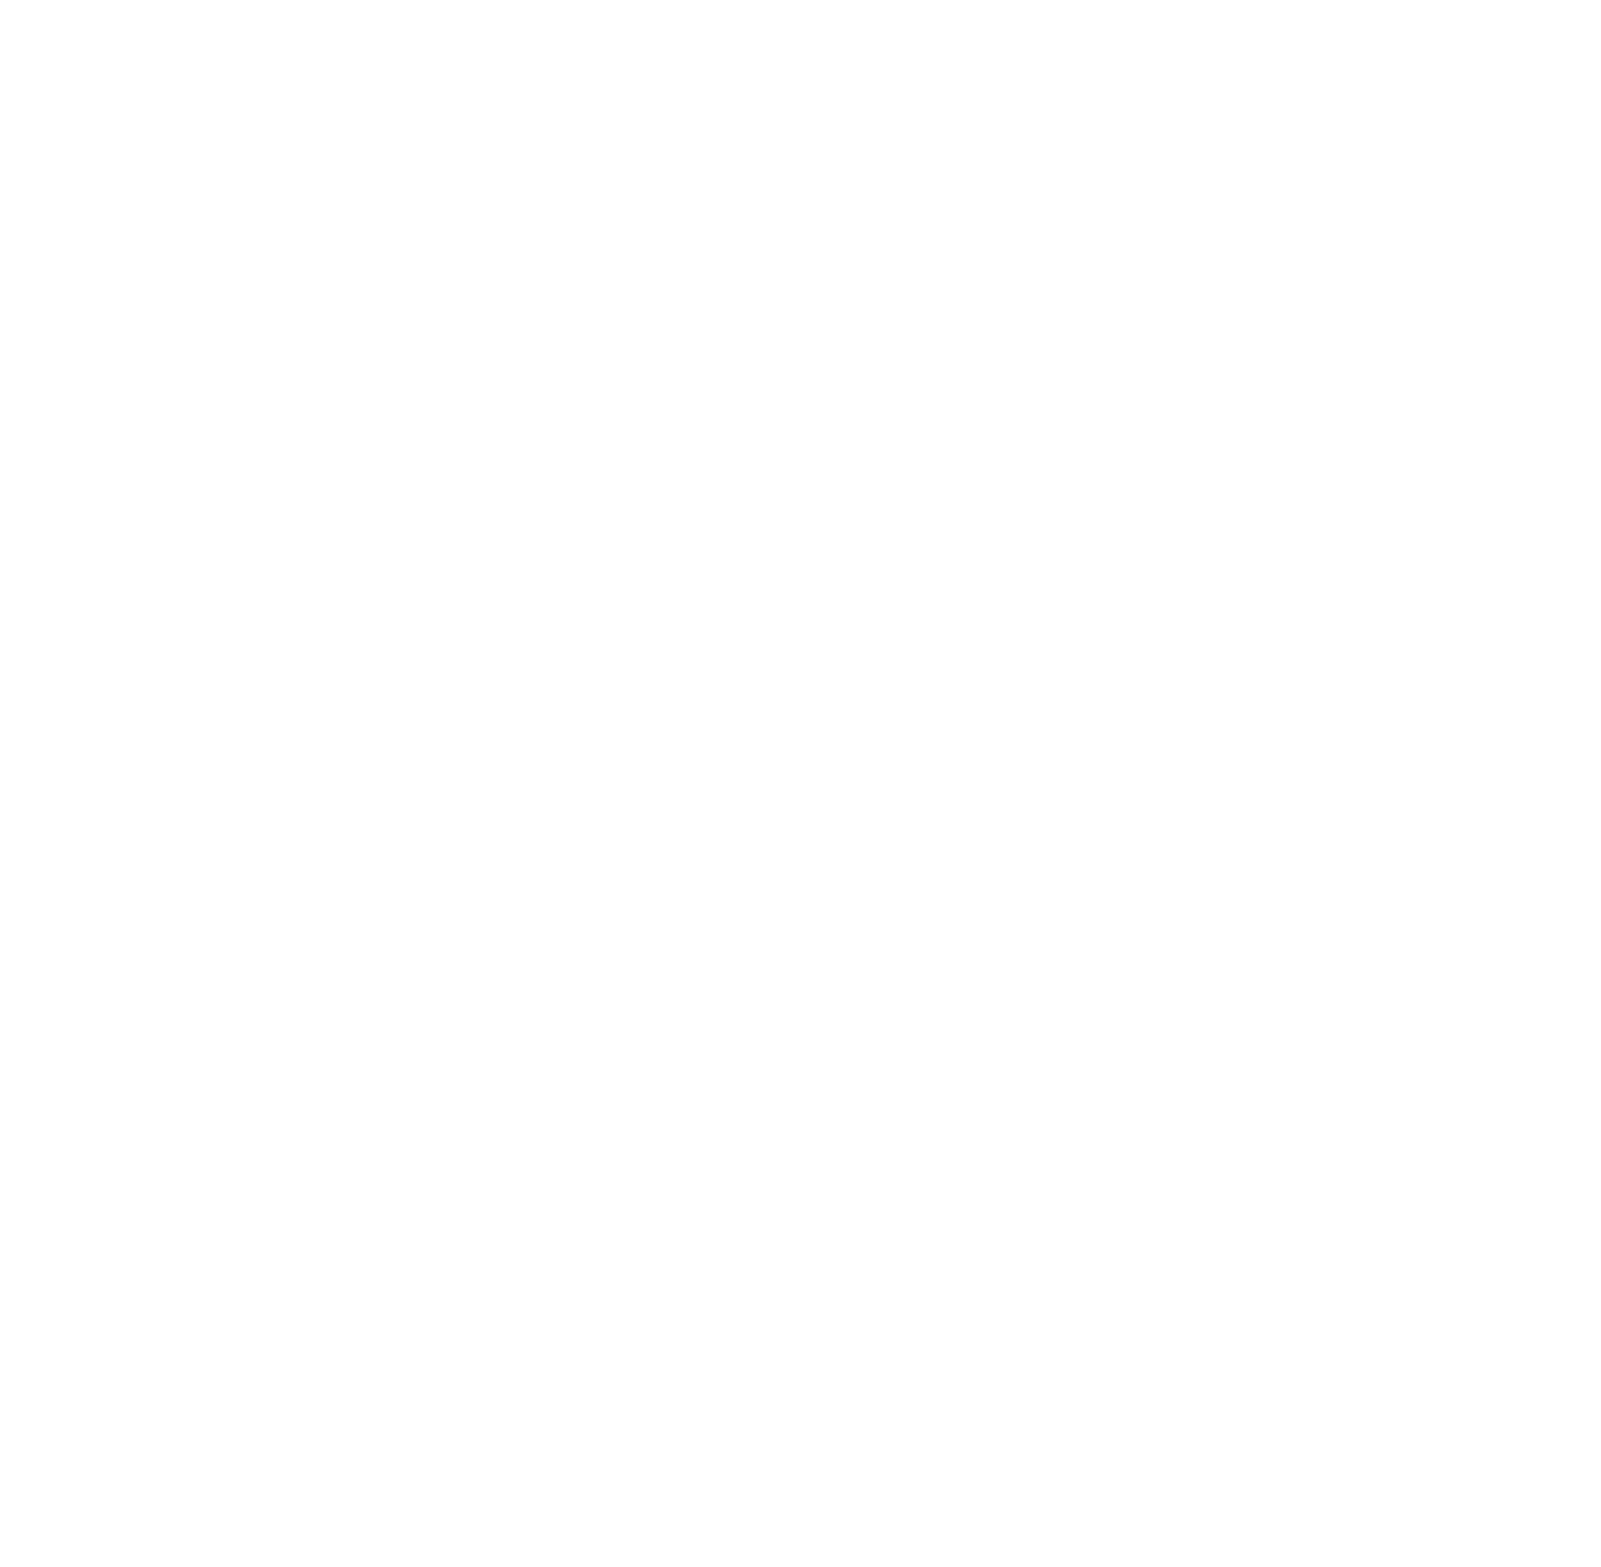 ANSTM WLL Marketing & Promoting